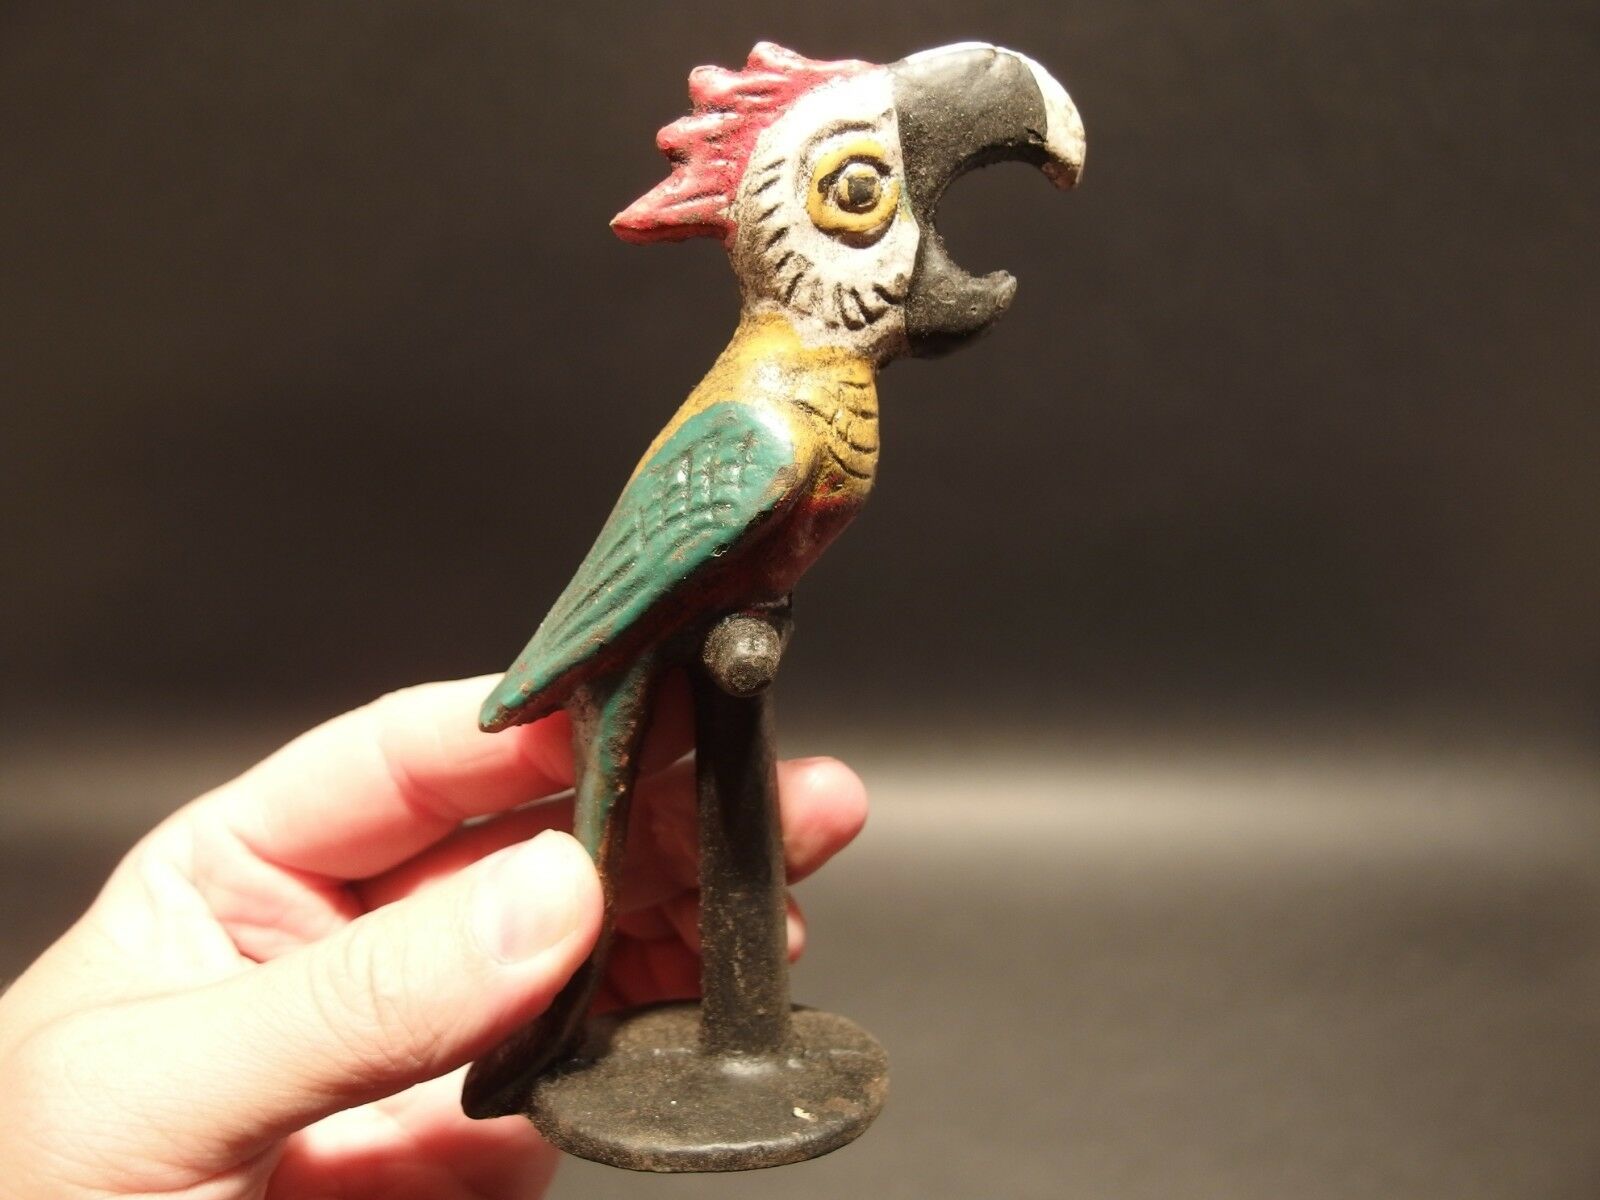 Antique Vintage Style Cast Iron Parrot Beer Bottle Opener bar tool - Early Home Decor